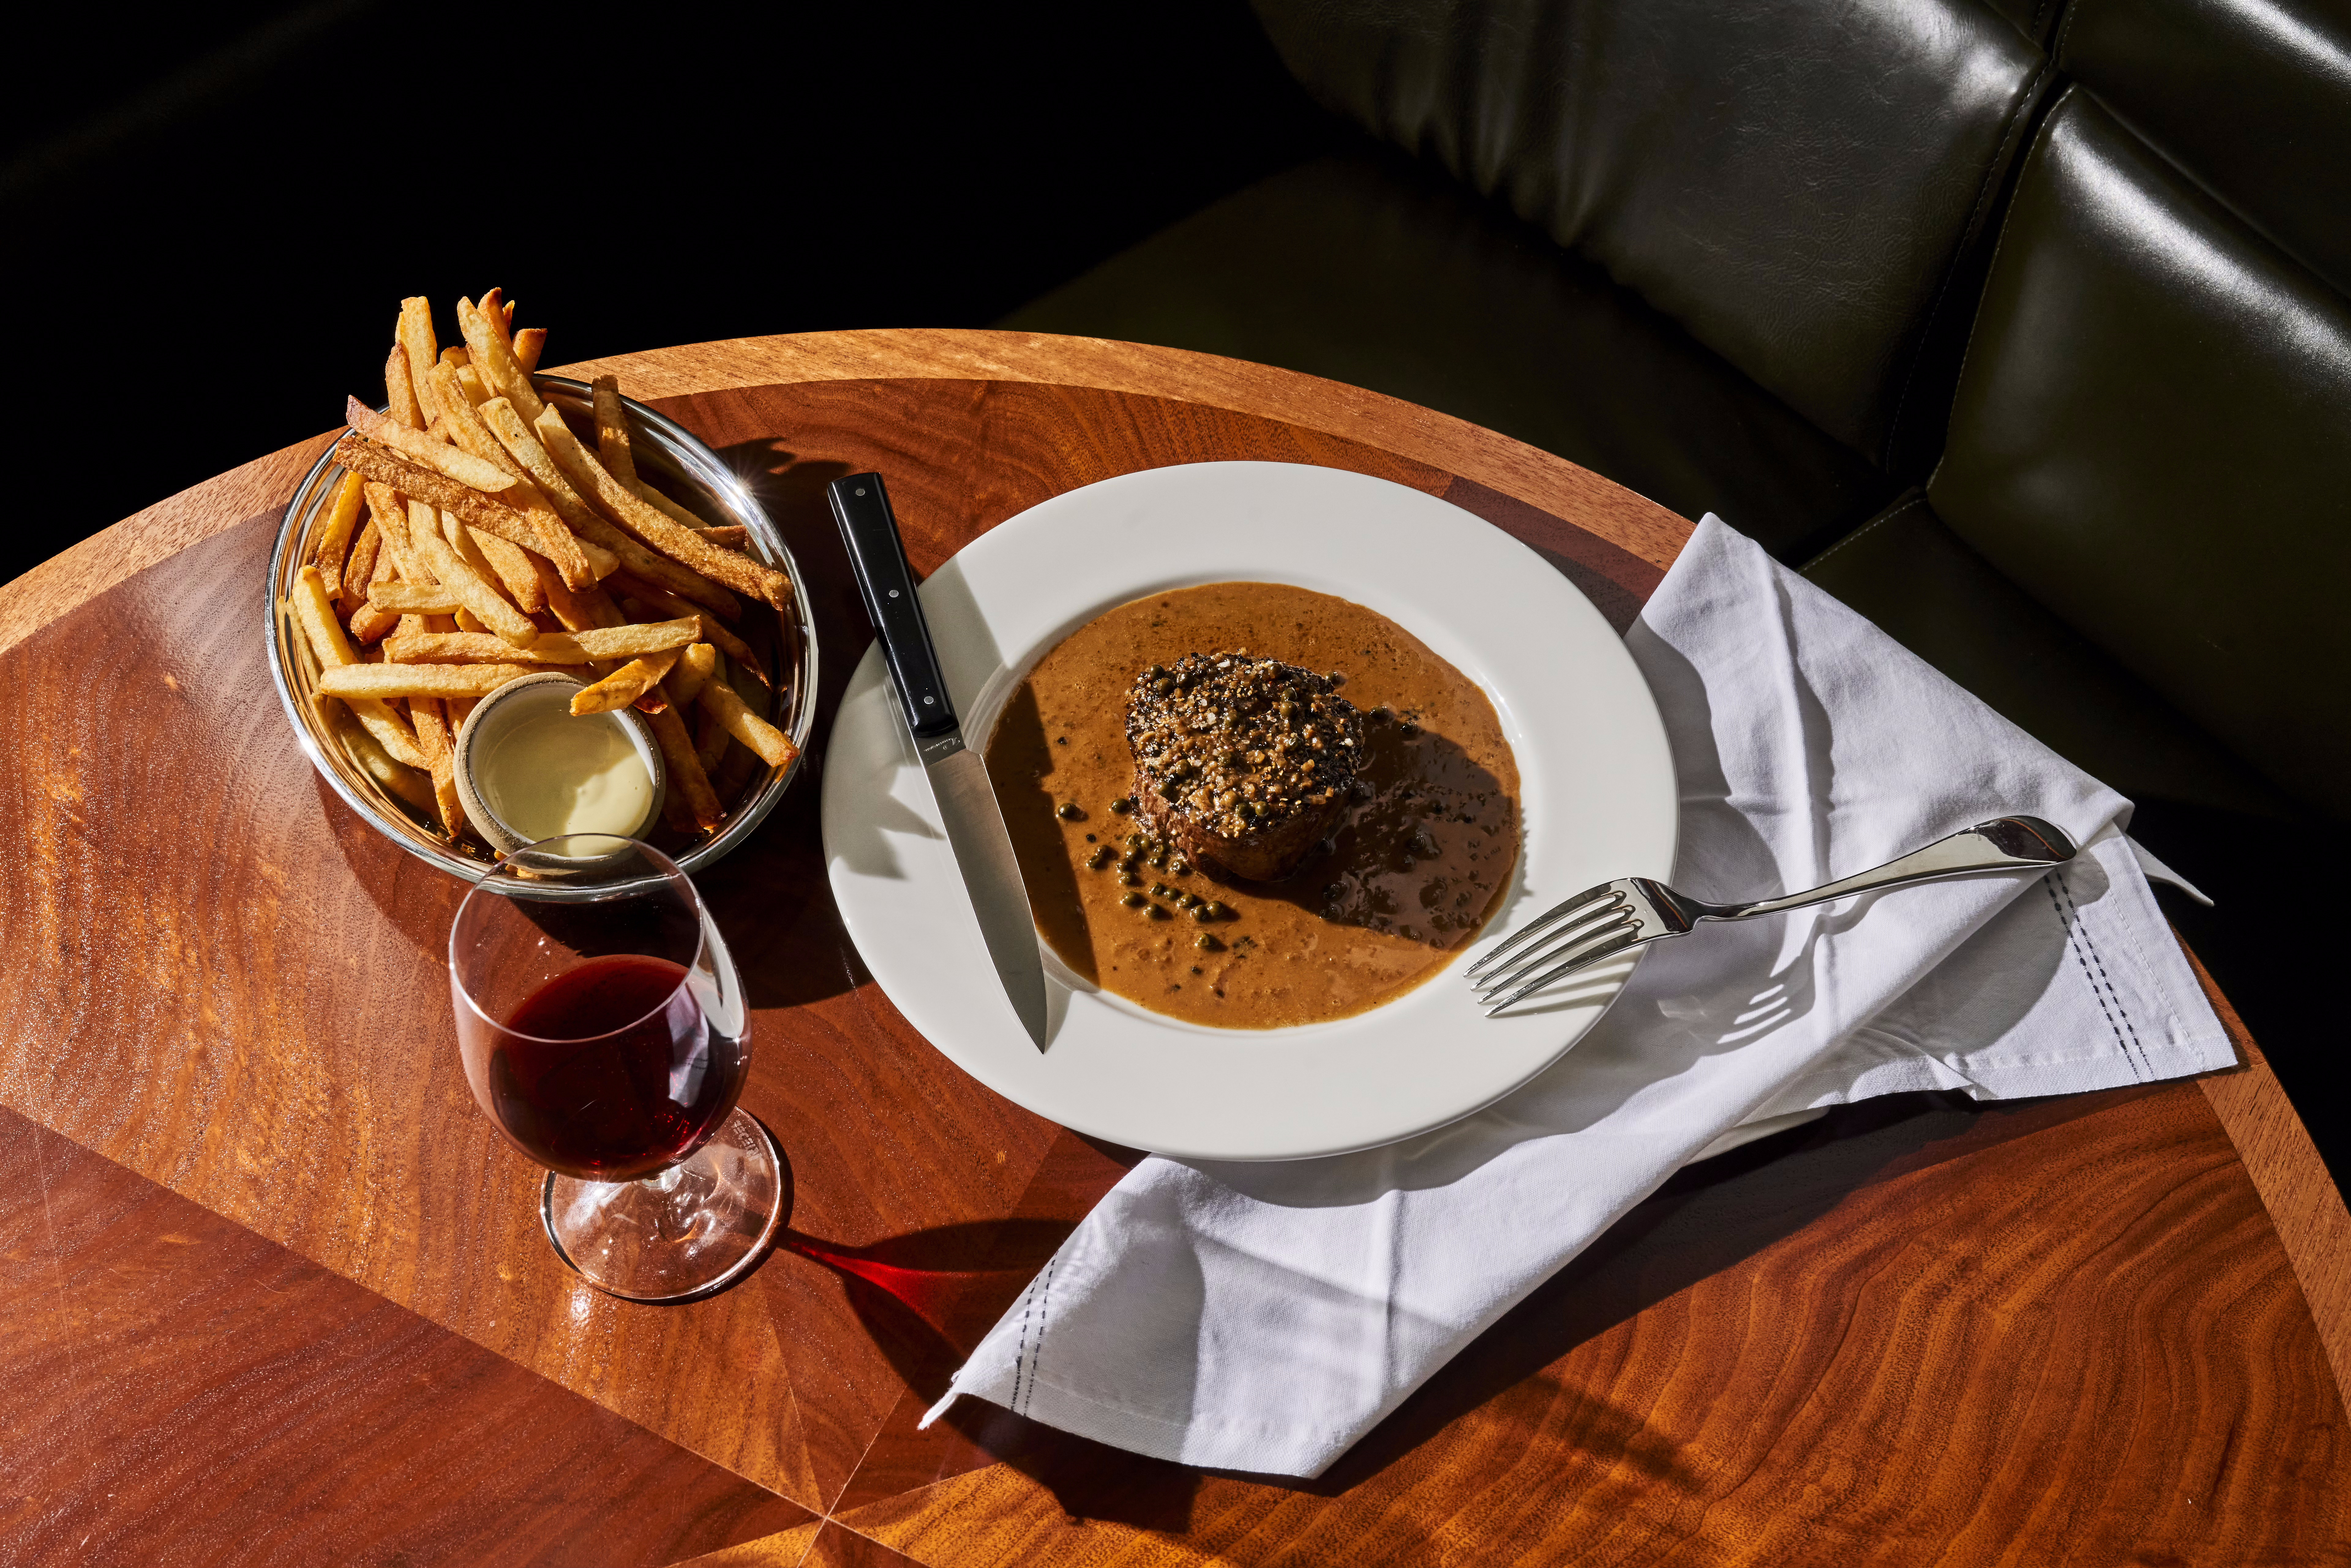 Bison au poivre sits on a plate, slathered in orange cream peppercorn sauce; a plate of fries sit on the side.